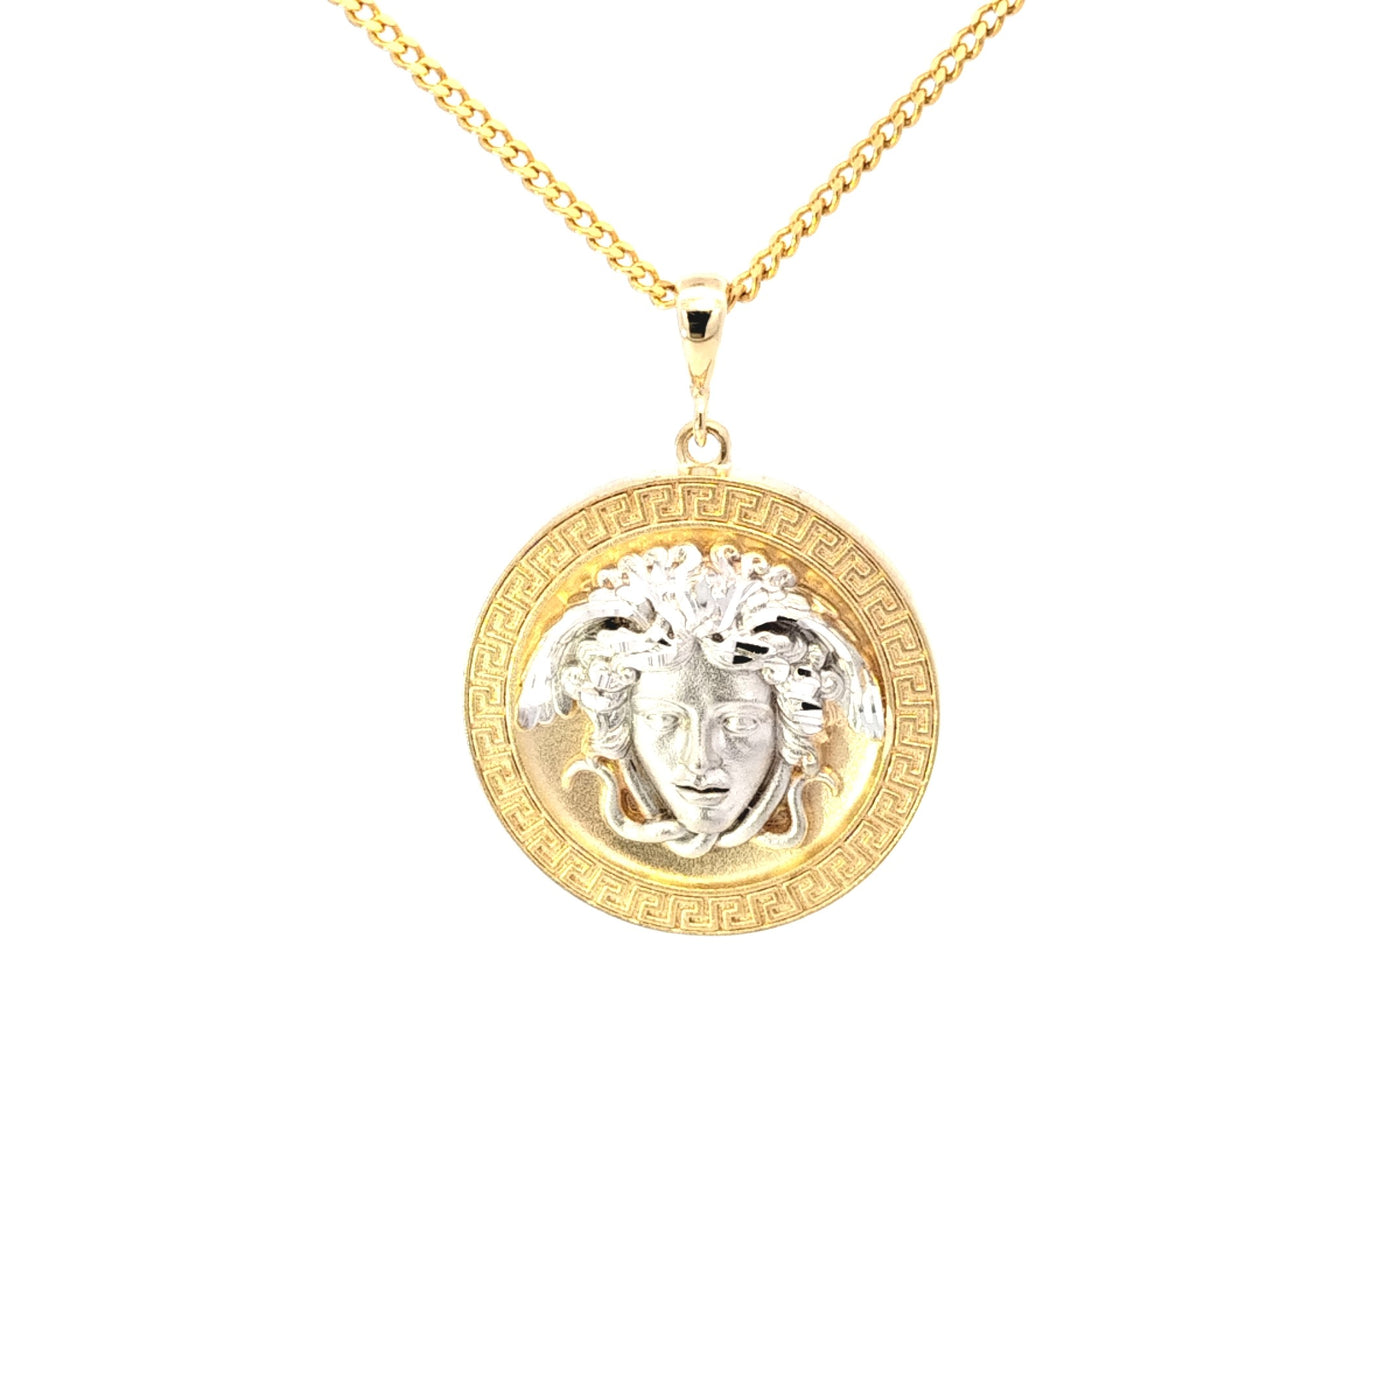 9ct Yellow and White Gold Versace Medallion, 25mm Diameter. Chain sold separately.